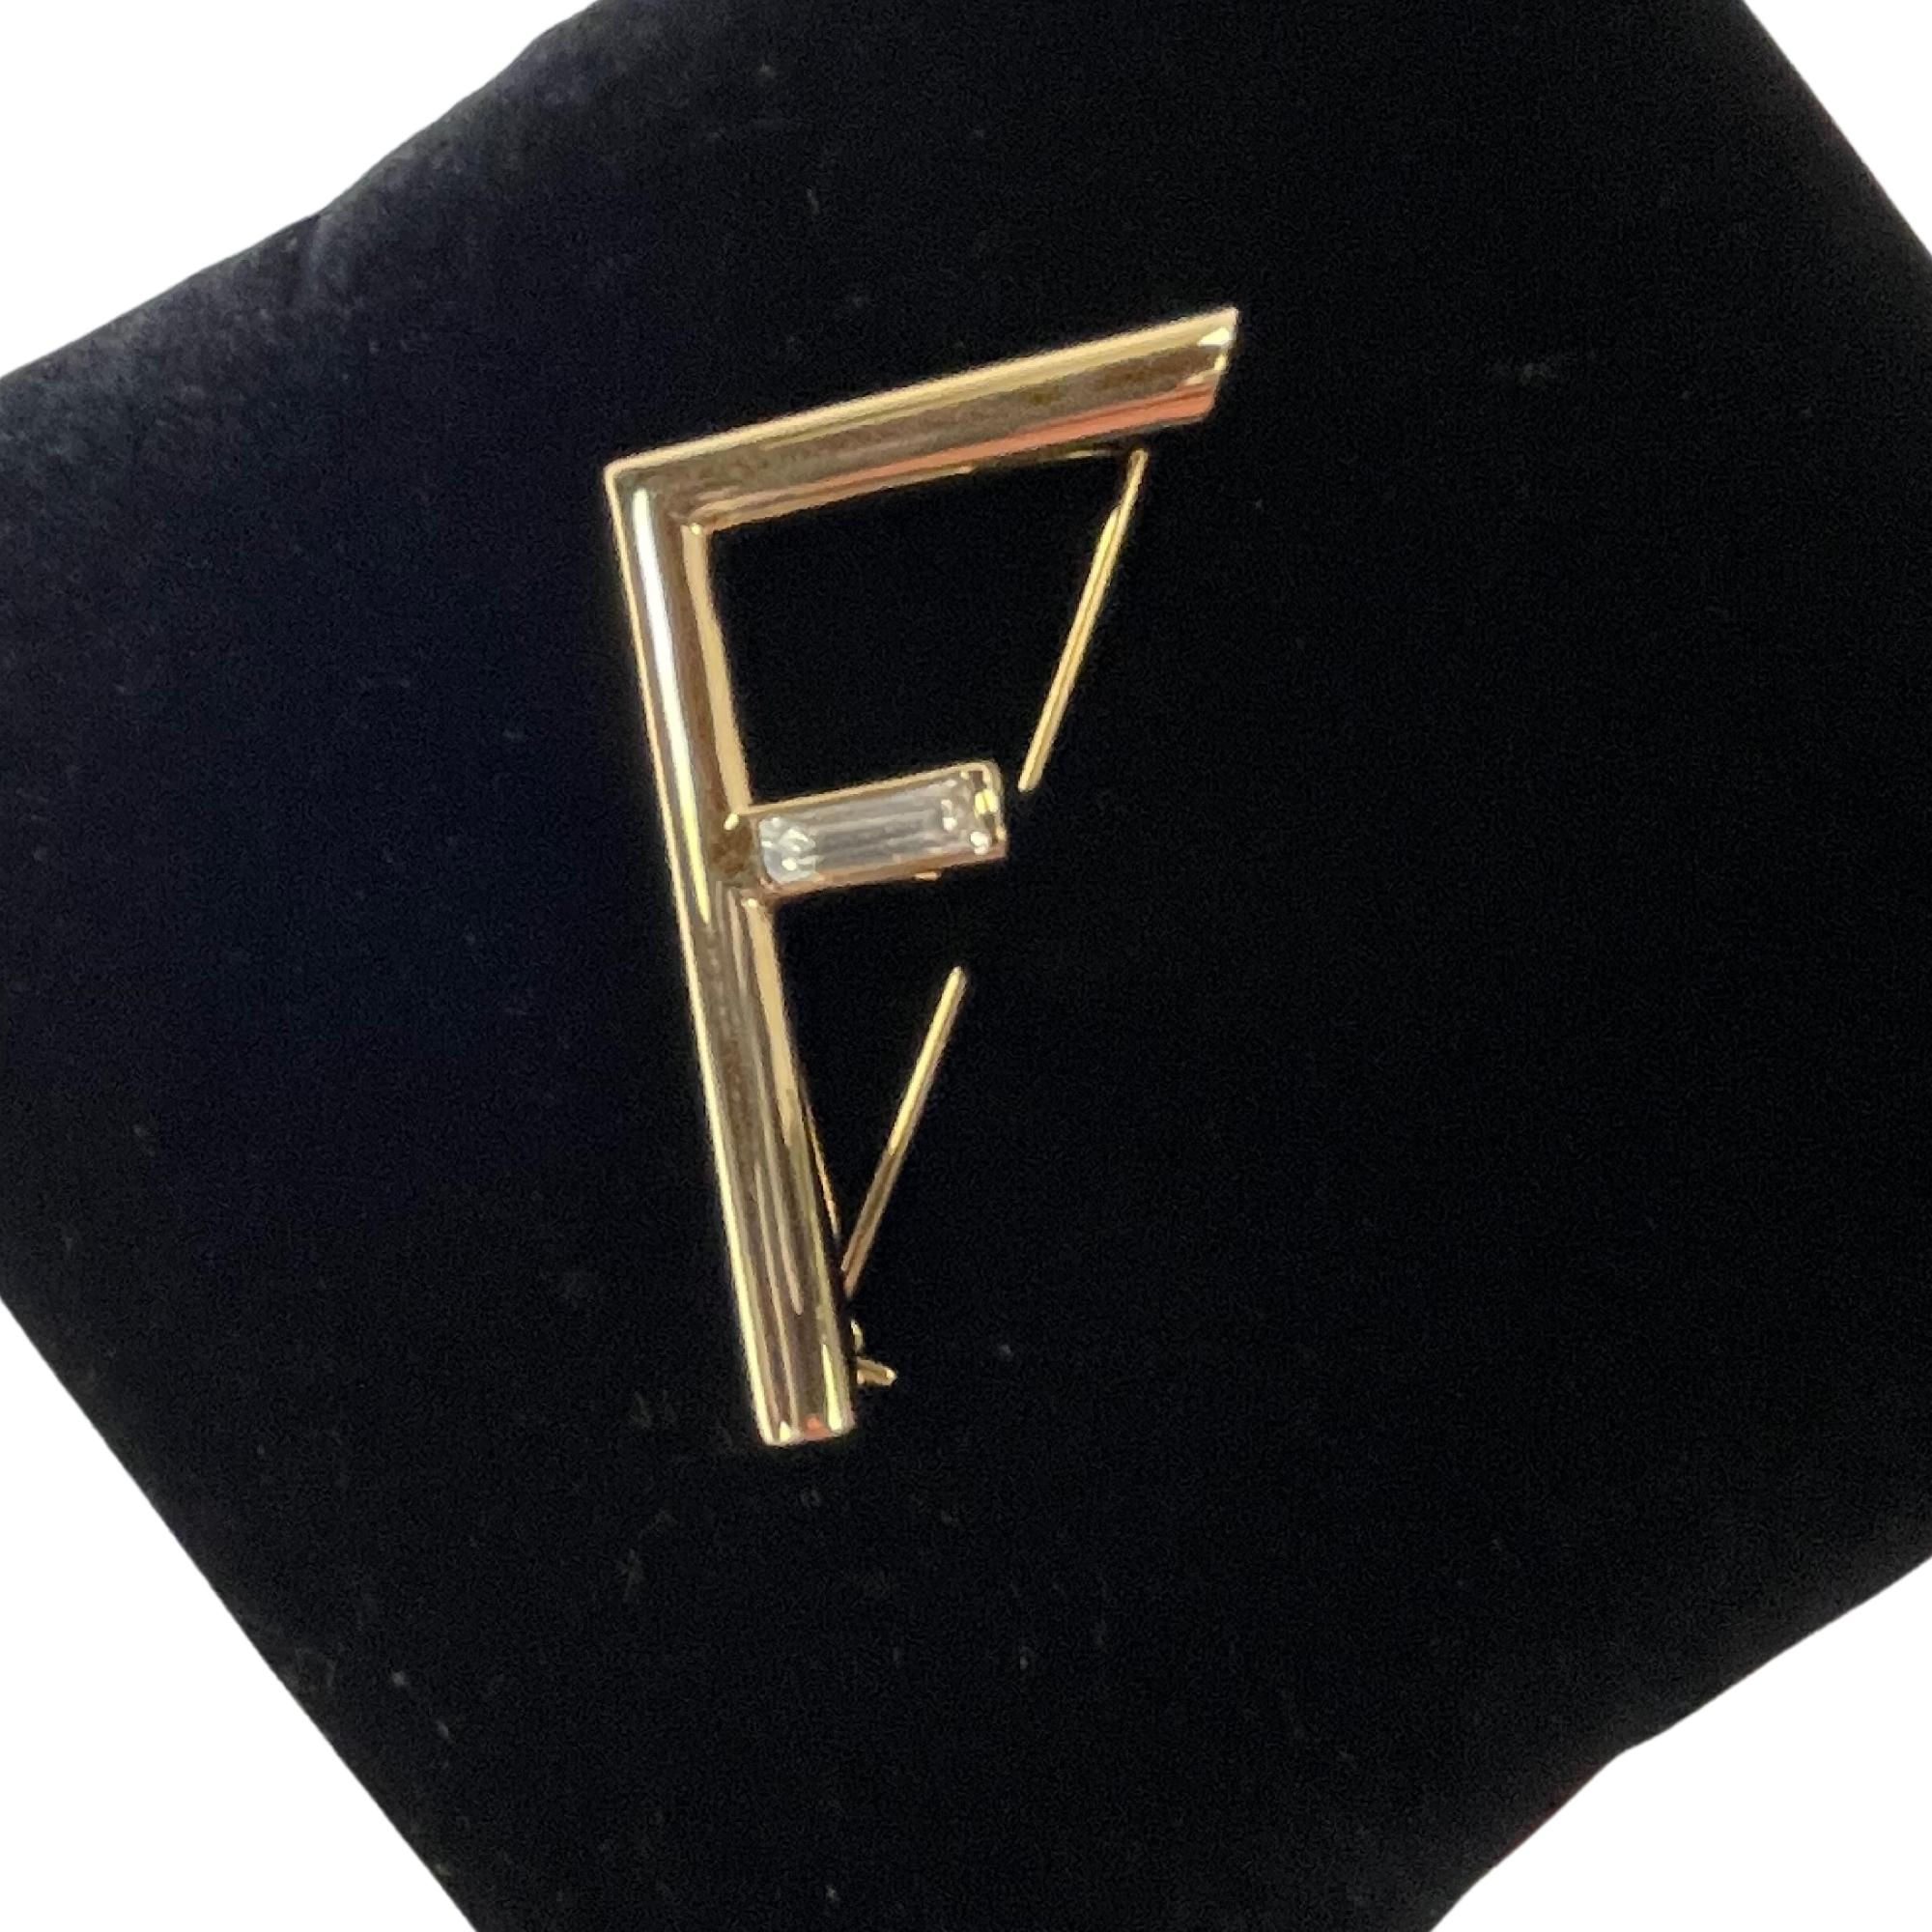 FENDI F GOLDTONE METALLIC BROOCH

Color: Gold tone
Material: Metalic
Marks:  Brand name & Made in Italy
Clasp Style: Pin

Measures: 2” x 1.6”
Comes with: Box
Condition: Very good. Like new with faint hairline scratches.

Made in Italy